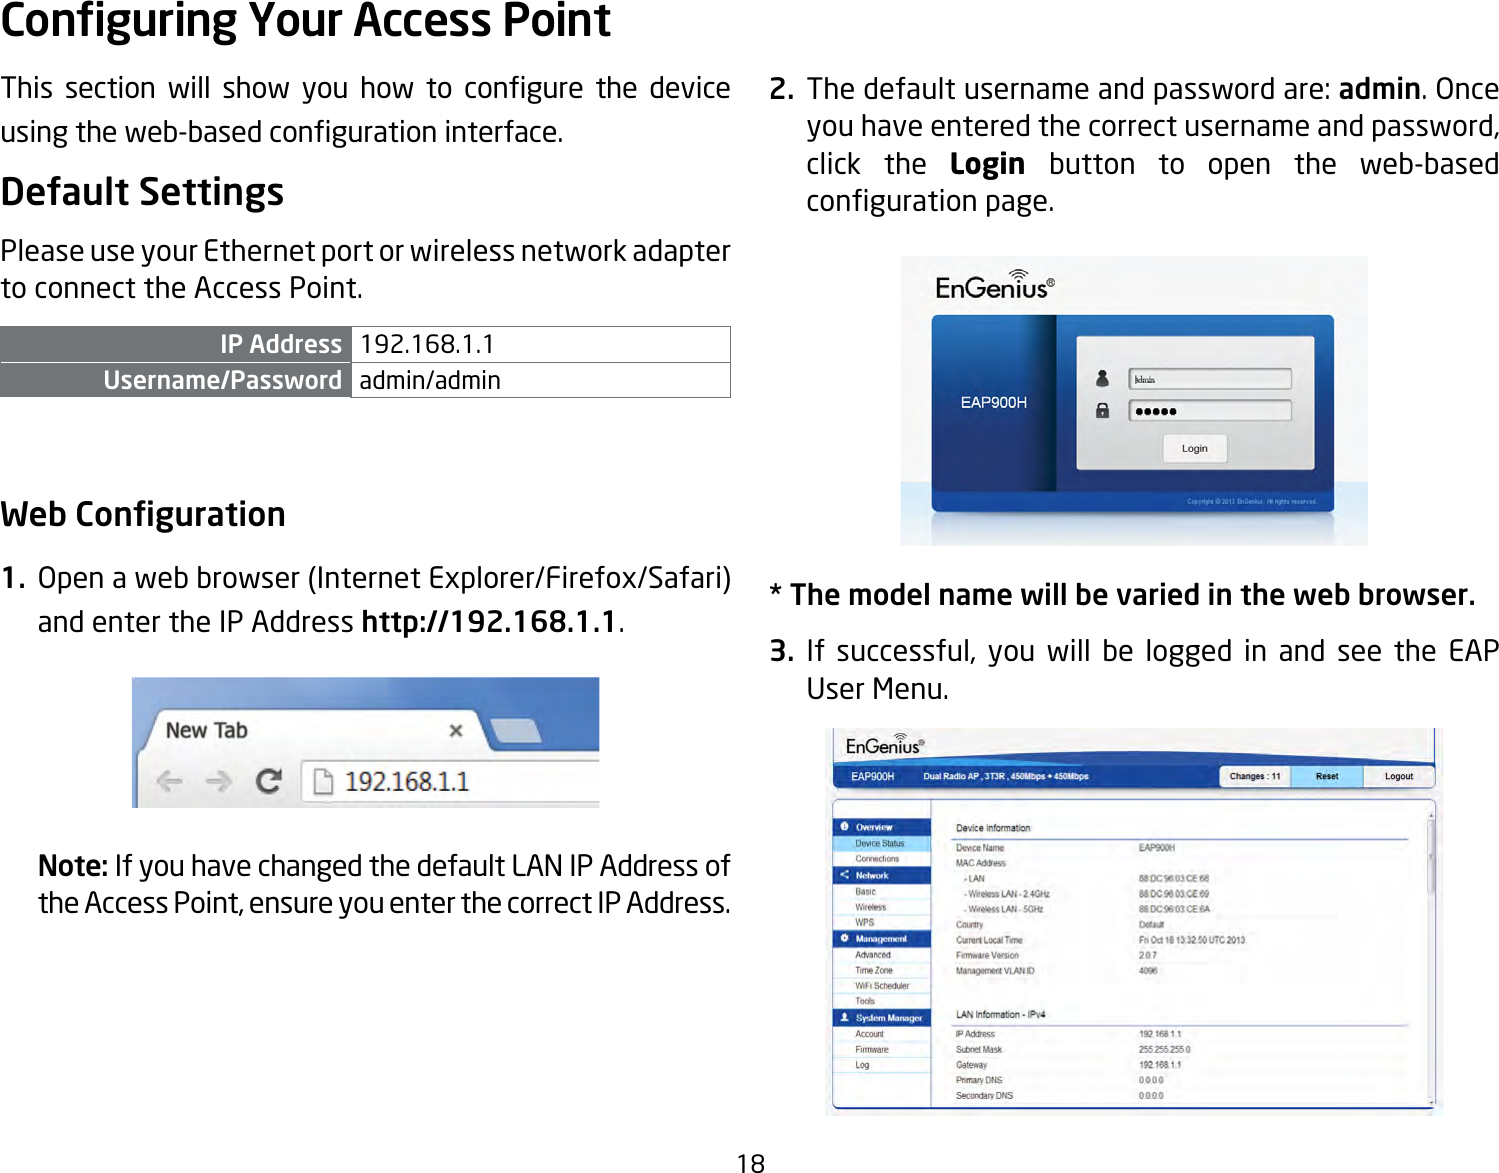 18This section will show you how to congure the deviceusingtheweb-basedcongurationinterface.Default SettingsPlease use your Ethernet port or wireless network adapter to connect the Access Point.IP Address 192.168.1.1Username/Password admin/admin Web Conguration1.  Open a web browser (Internet Explorer/Firefox/Safari) and enter the IP Address http://192.168.1.1.Note: If you have changed the default LAN IP Address of the Access Point, ensure you enter the correct IP Address.2. Thedefaultusernameandpasswordare:admin. Once you have entered the correct username and password, click the Login  button to open the web-based congurationpage.* The model name will be varied in the web browser.3. If successful, you will be logged in and see the EAP User Menu.Conguring Your Access Point